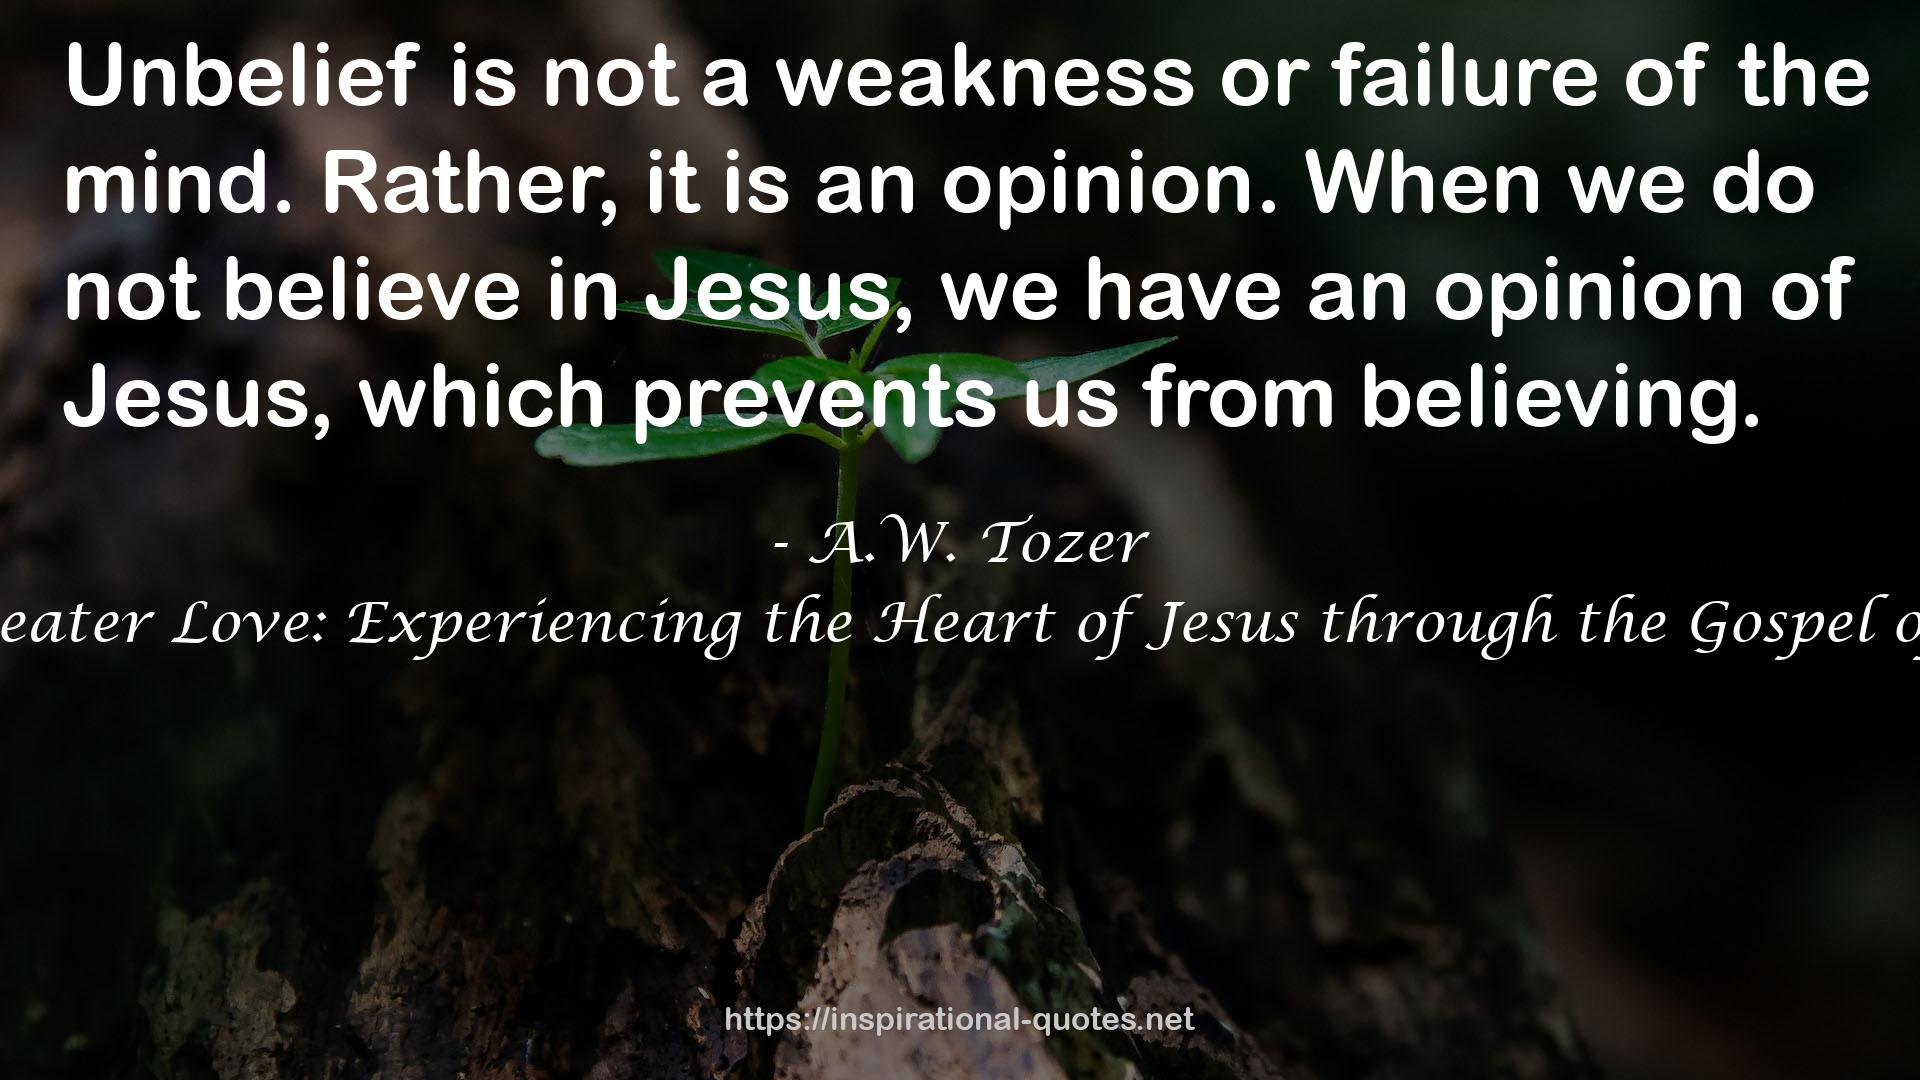 No Greater Love: Experiencing the Heart of Jesus through the Gospel of John QUOTES